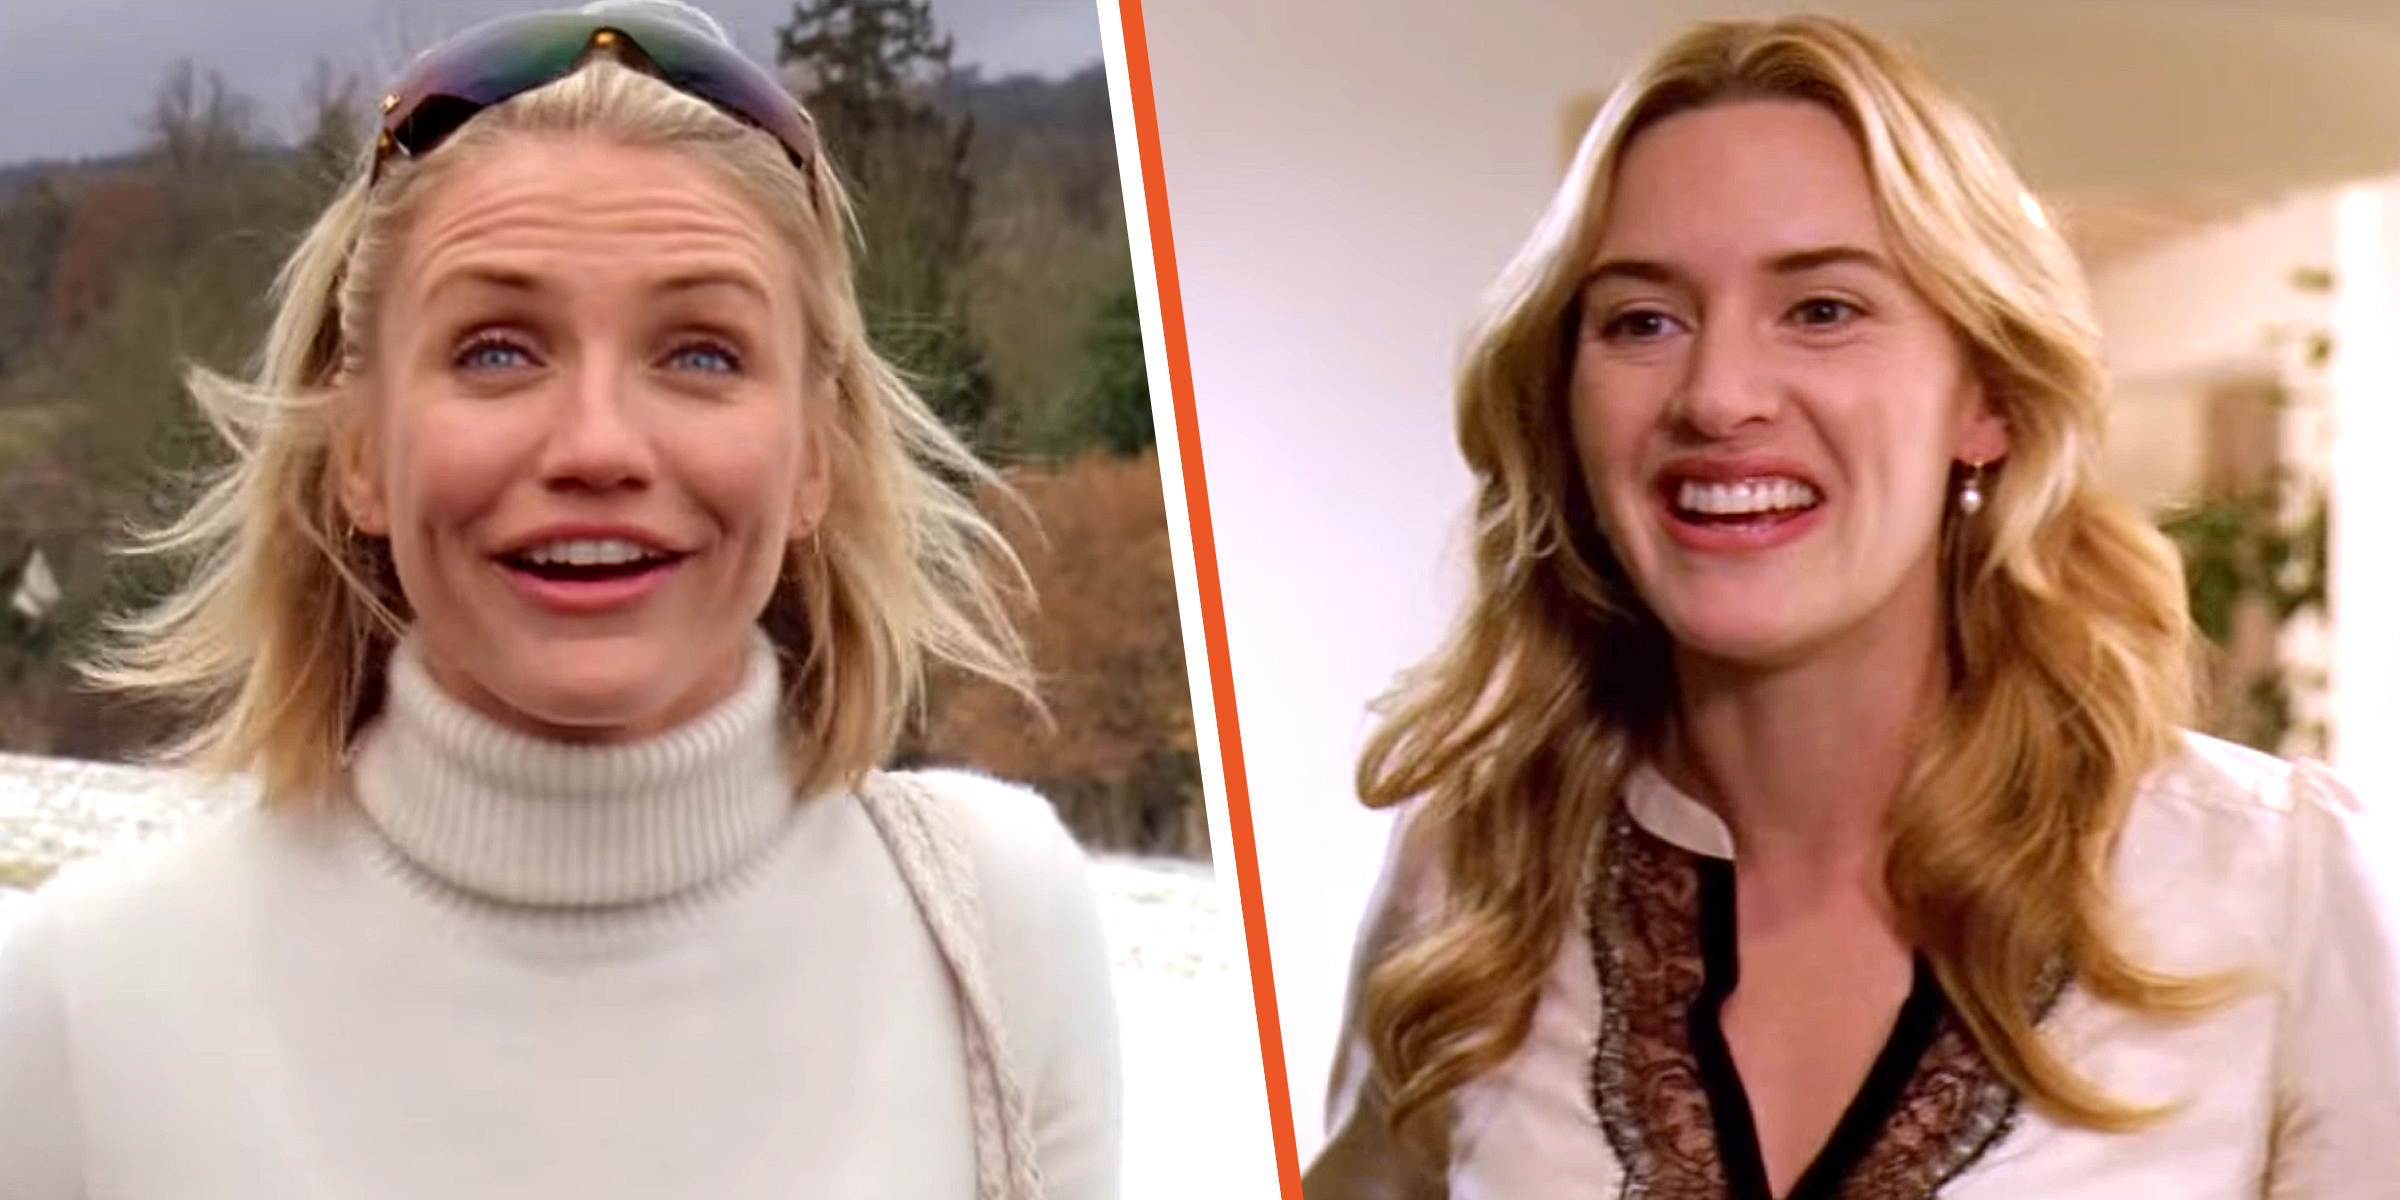 L'actrice Cameron Diaz | L'actrice Kate Winslet | Source : YouTube.com/Sony Pictures Entertainment